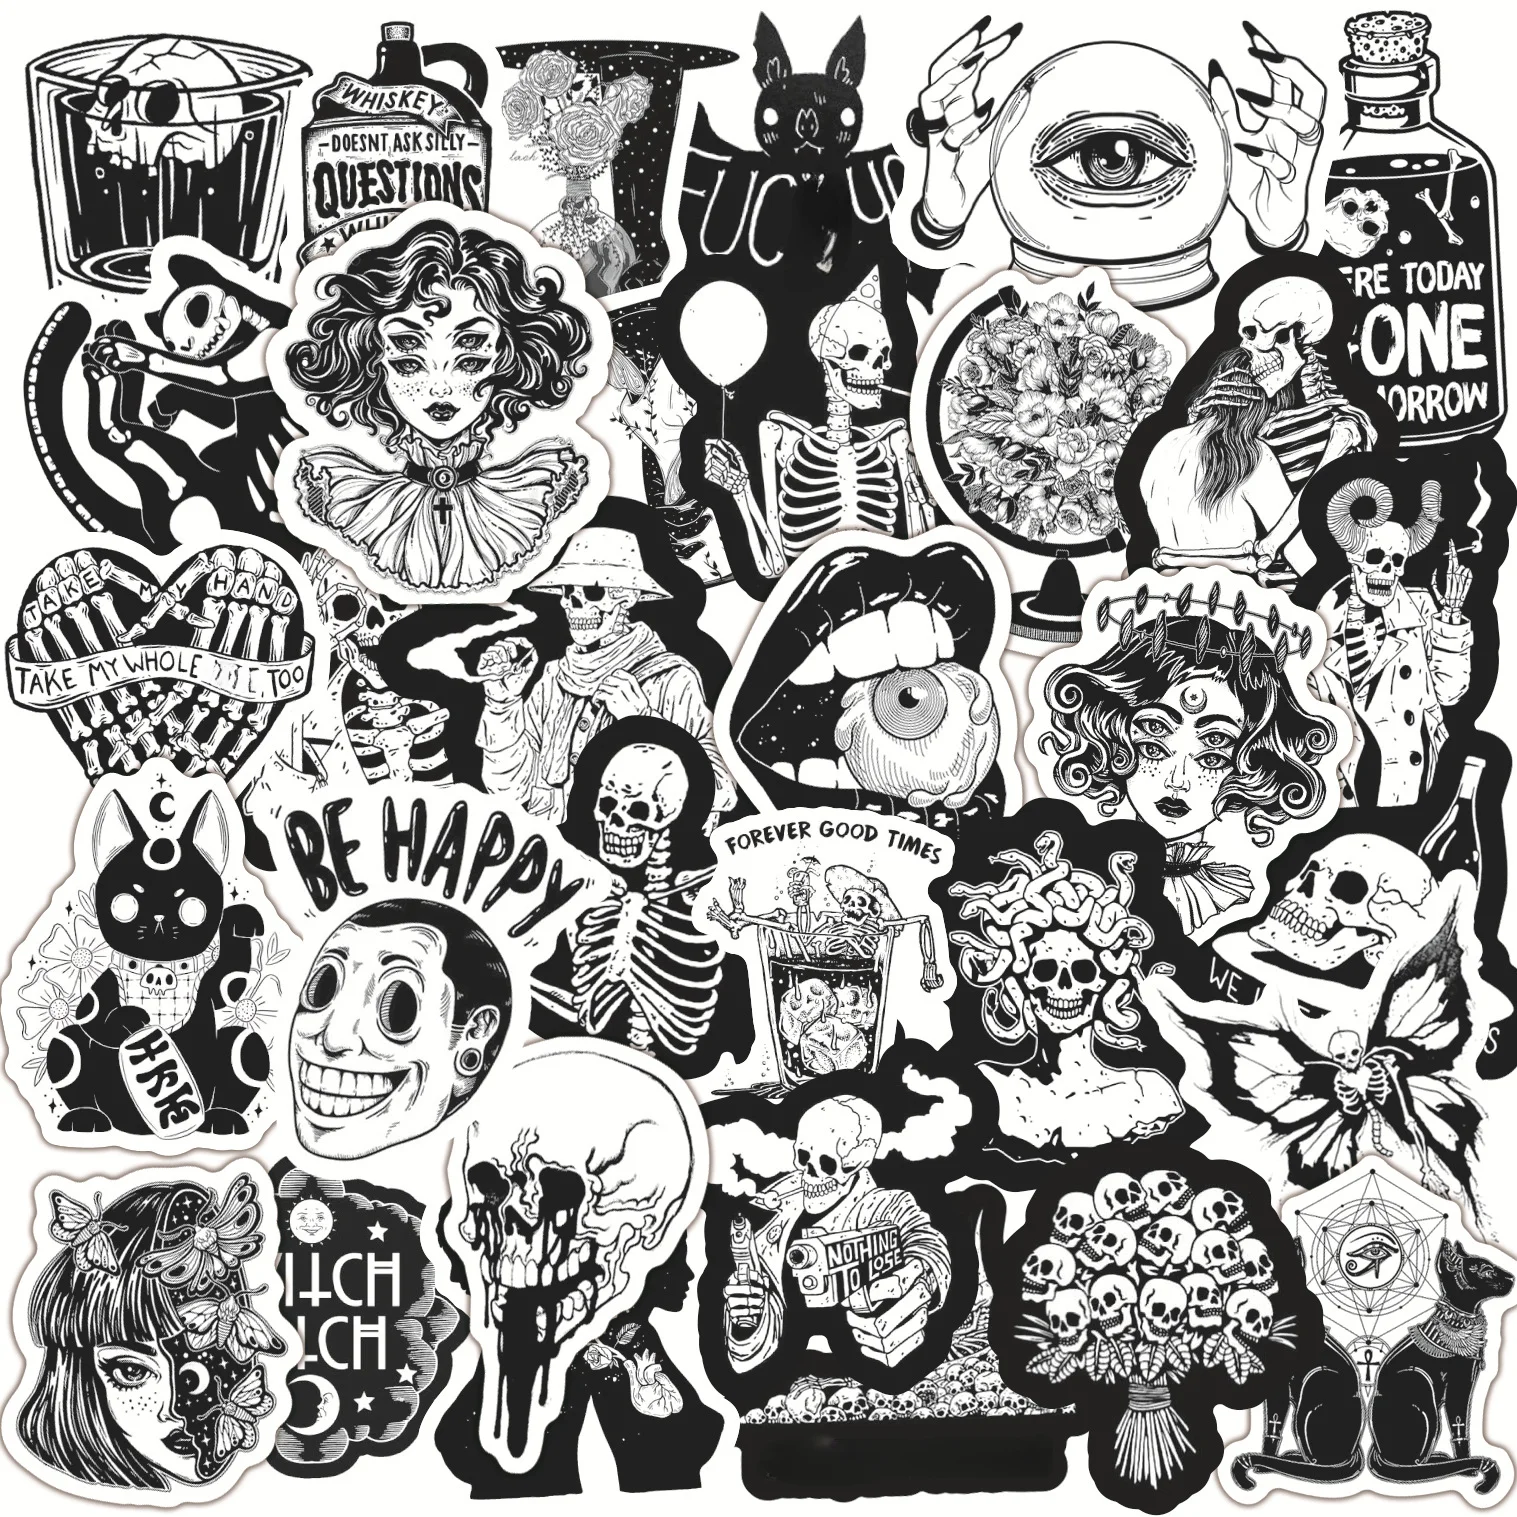 100PCS Mixed Black White Gothic Stickers Graffiti Motorcycle Skateboard Travel Phone Case Decal Toys Sticker Waterproof